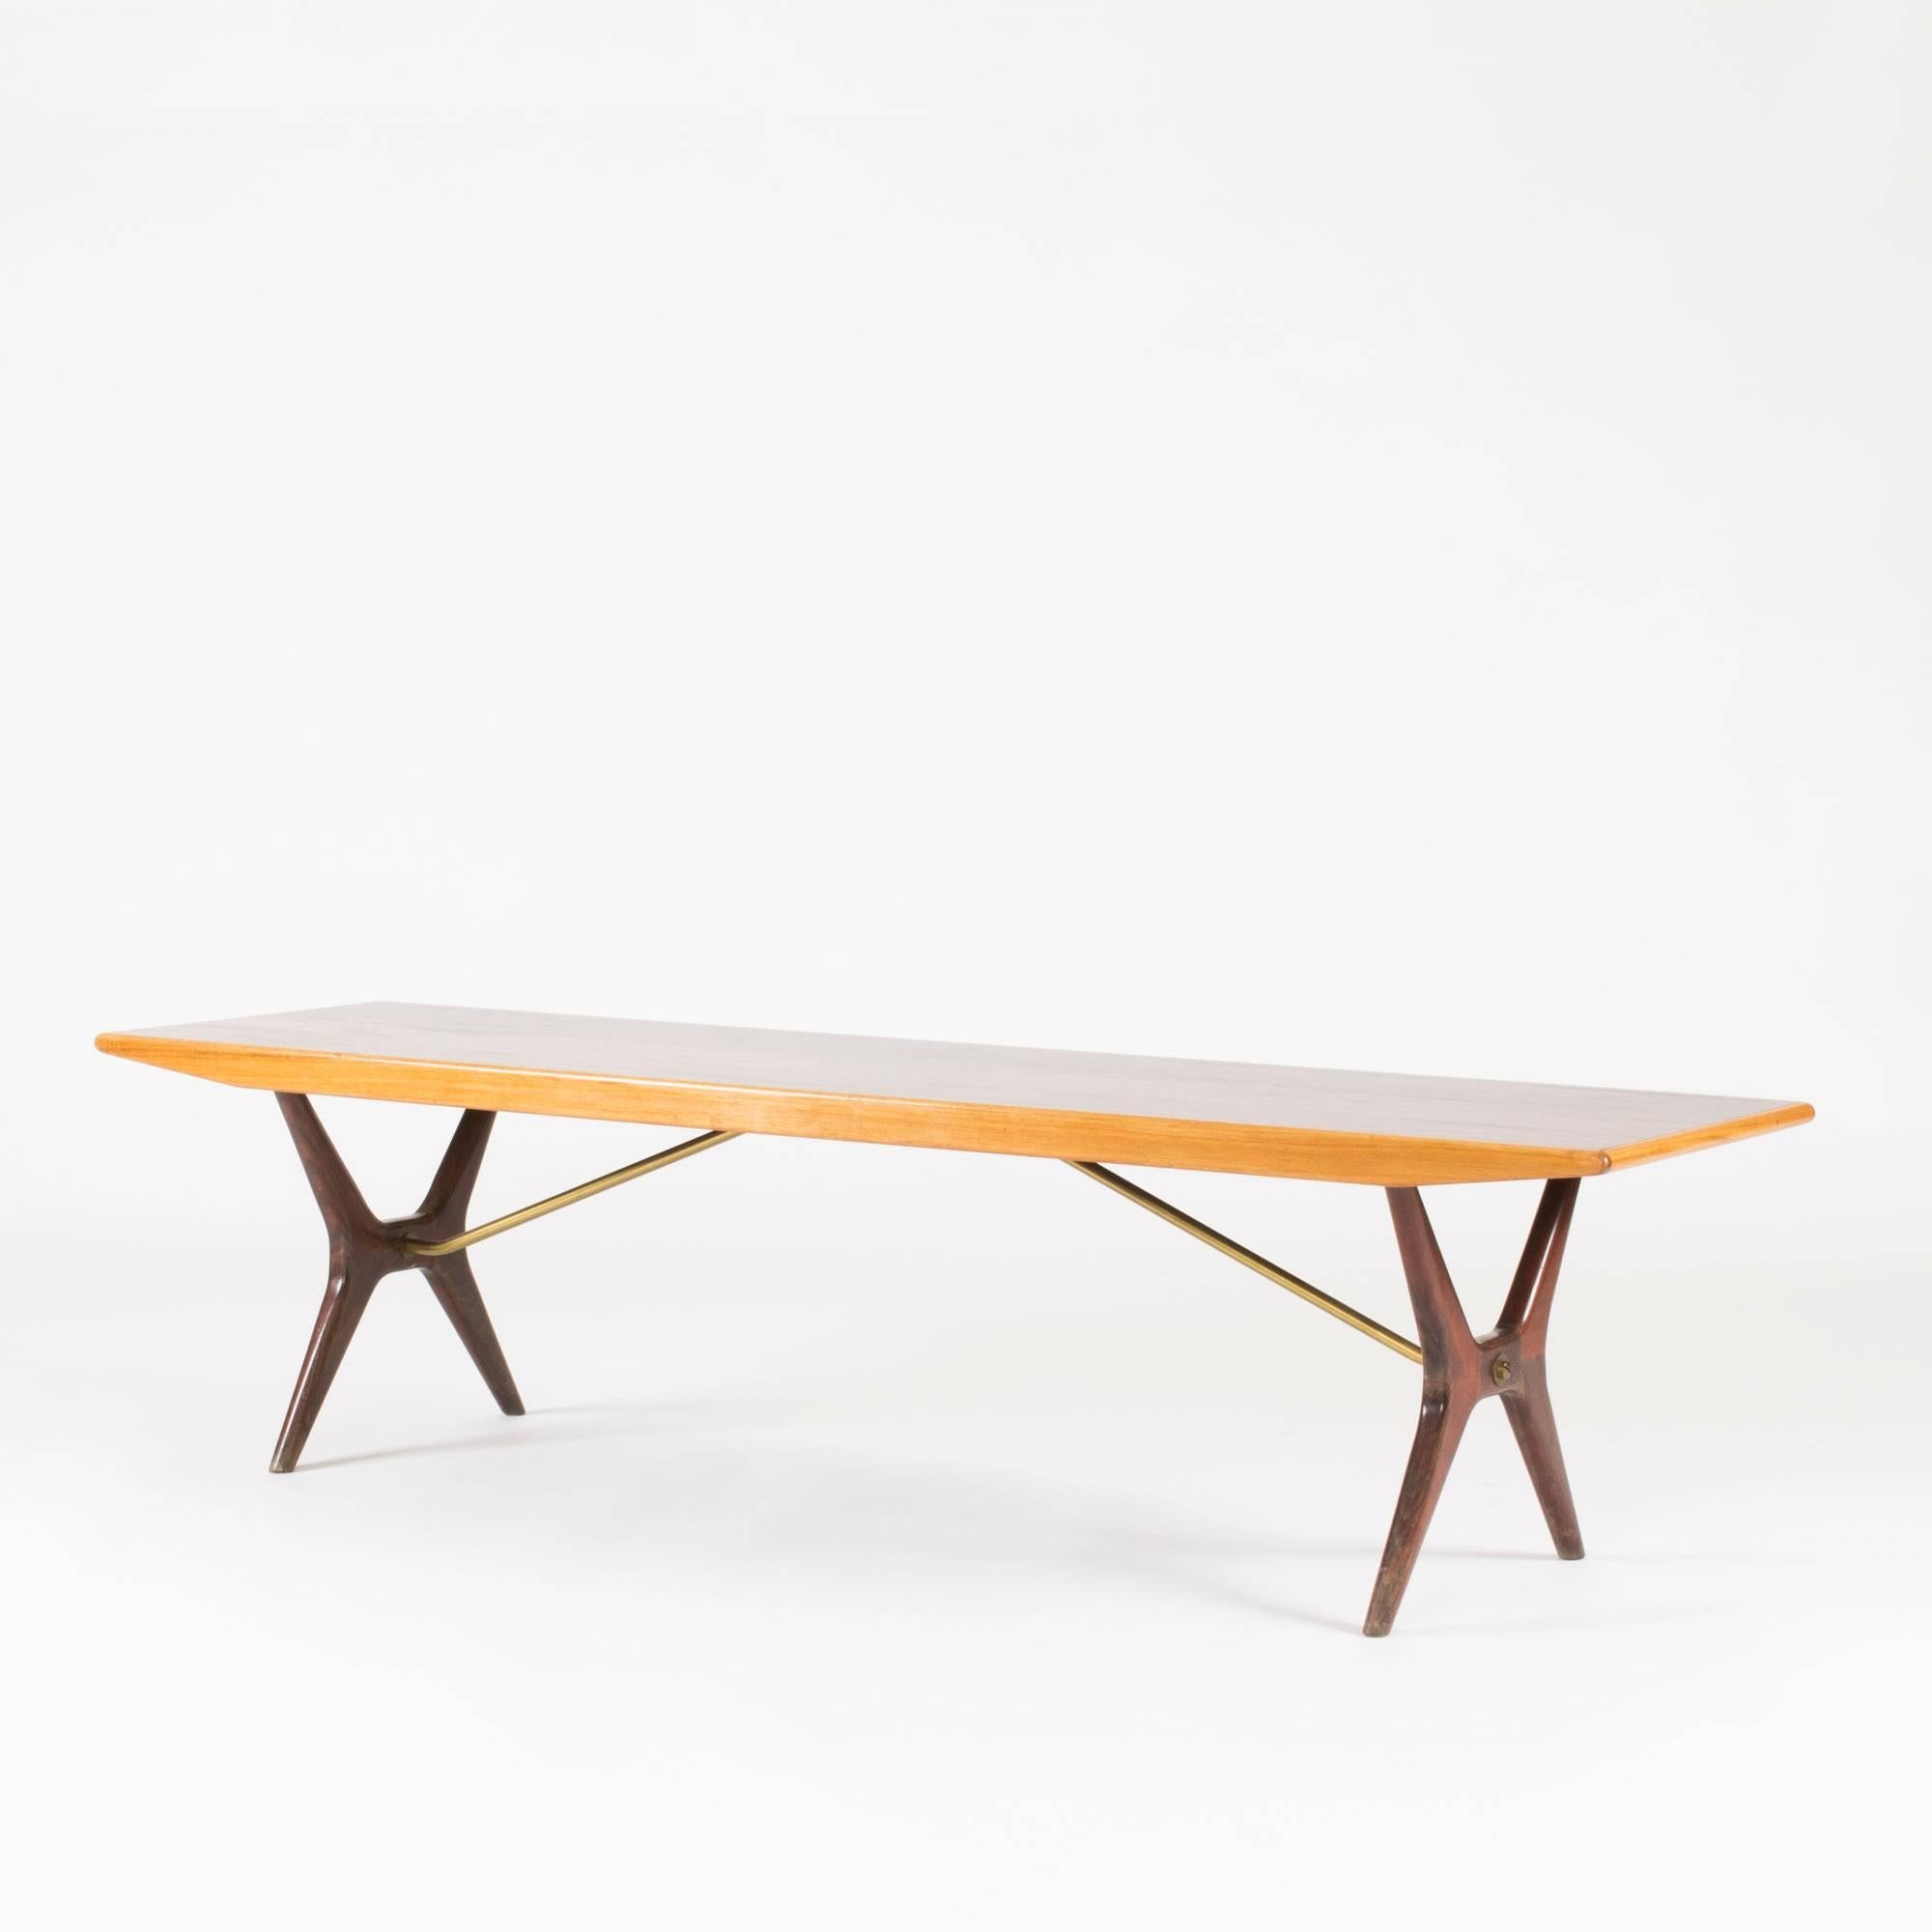 Coffee table by Karl-Erik Ekselius in a long, sleek design with contrasting kinds of wood. The base is made from rosewood and the rosewood tabletop is framed by edges of birch. Beautiful smooth veneer, saturated color. Brass extenders under the